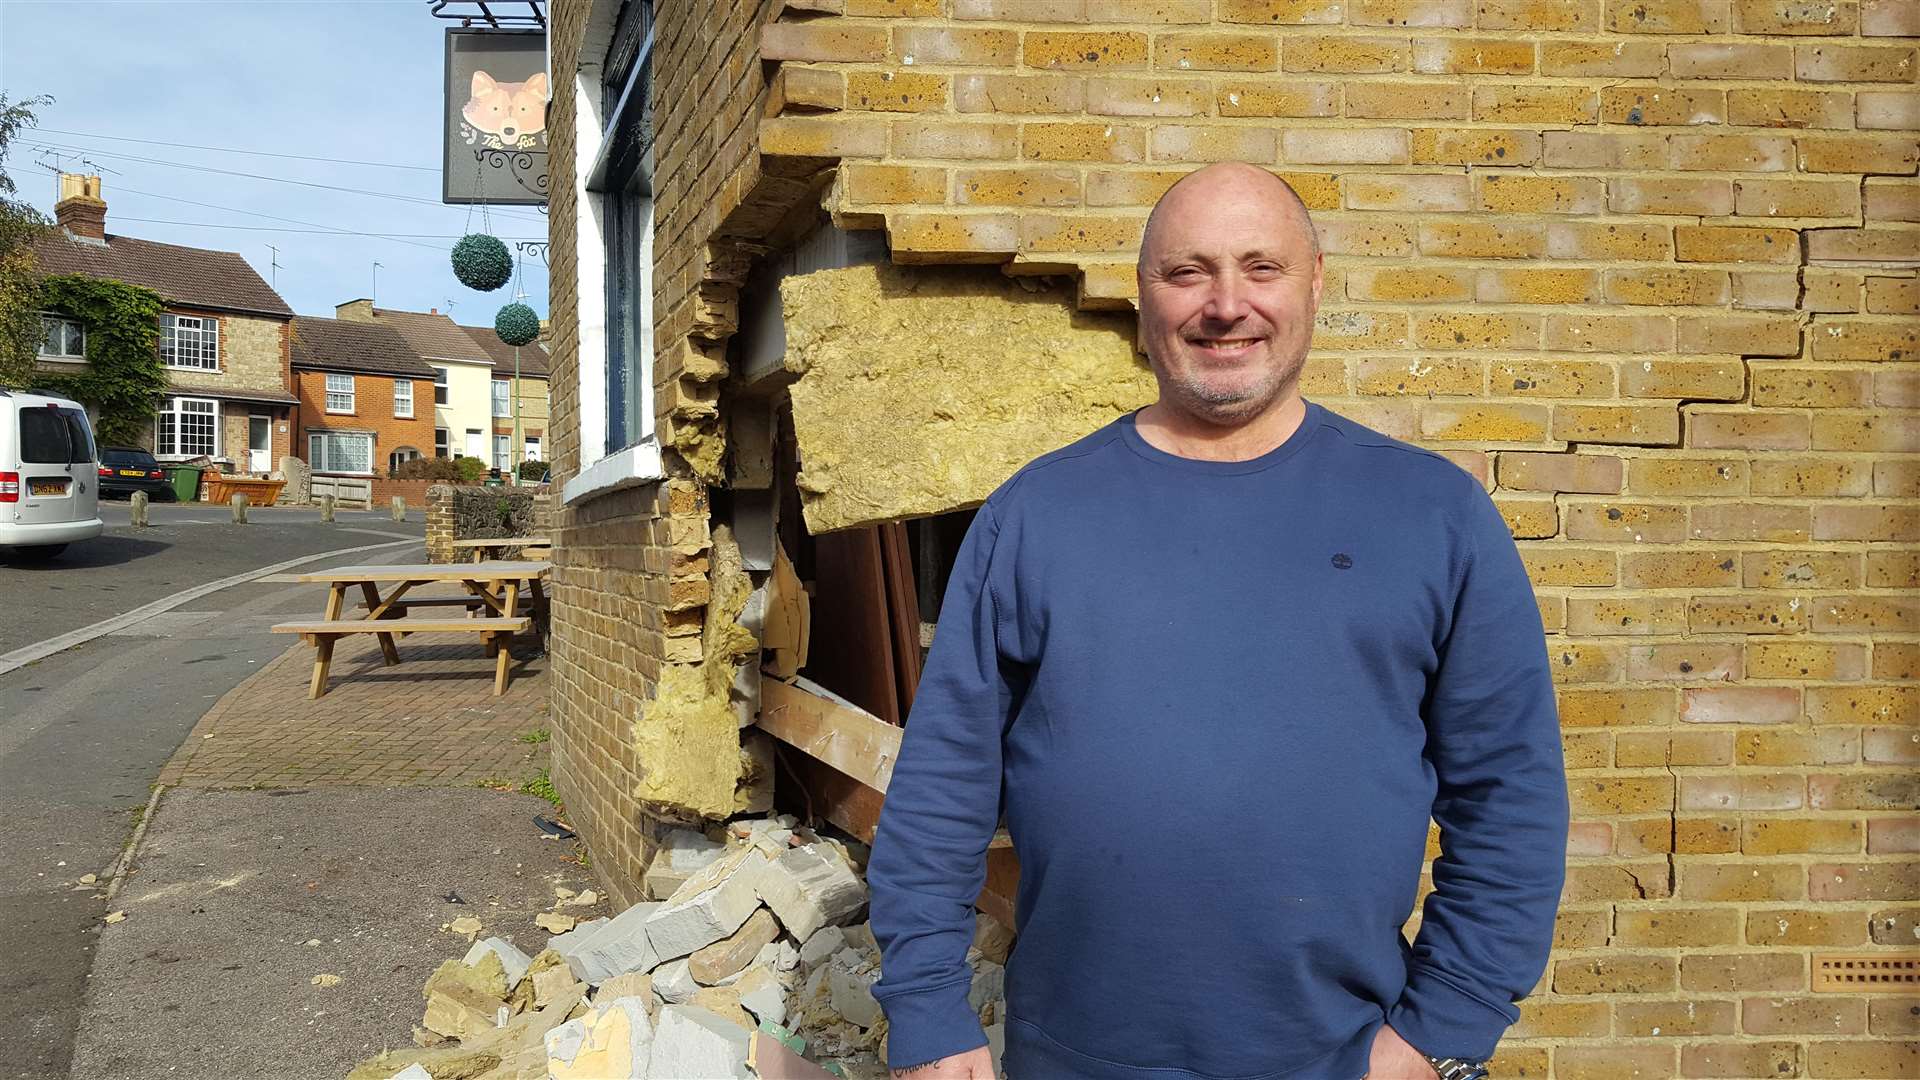 Landlord Michael Hawney was in good spirits, even making jokes, as the car was finally removed